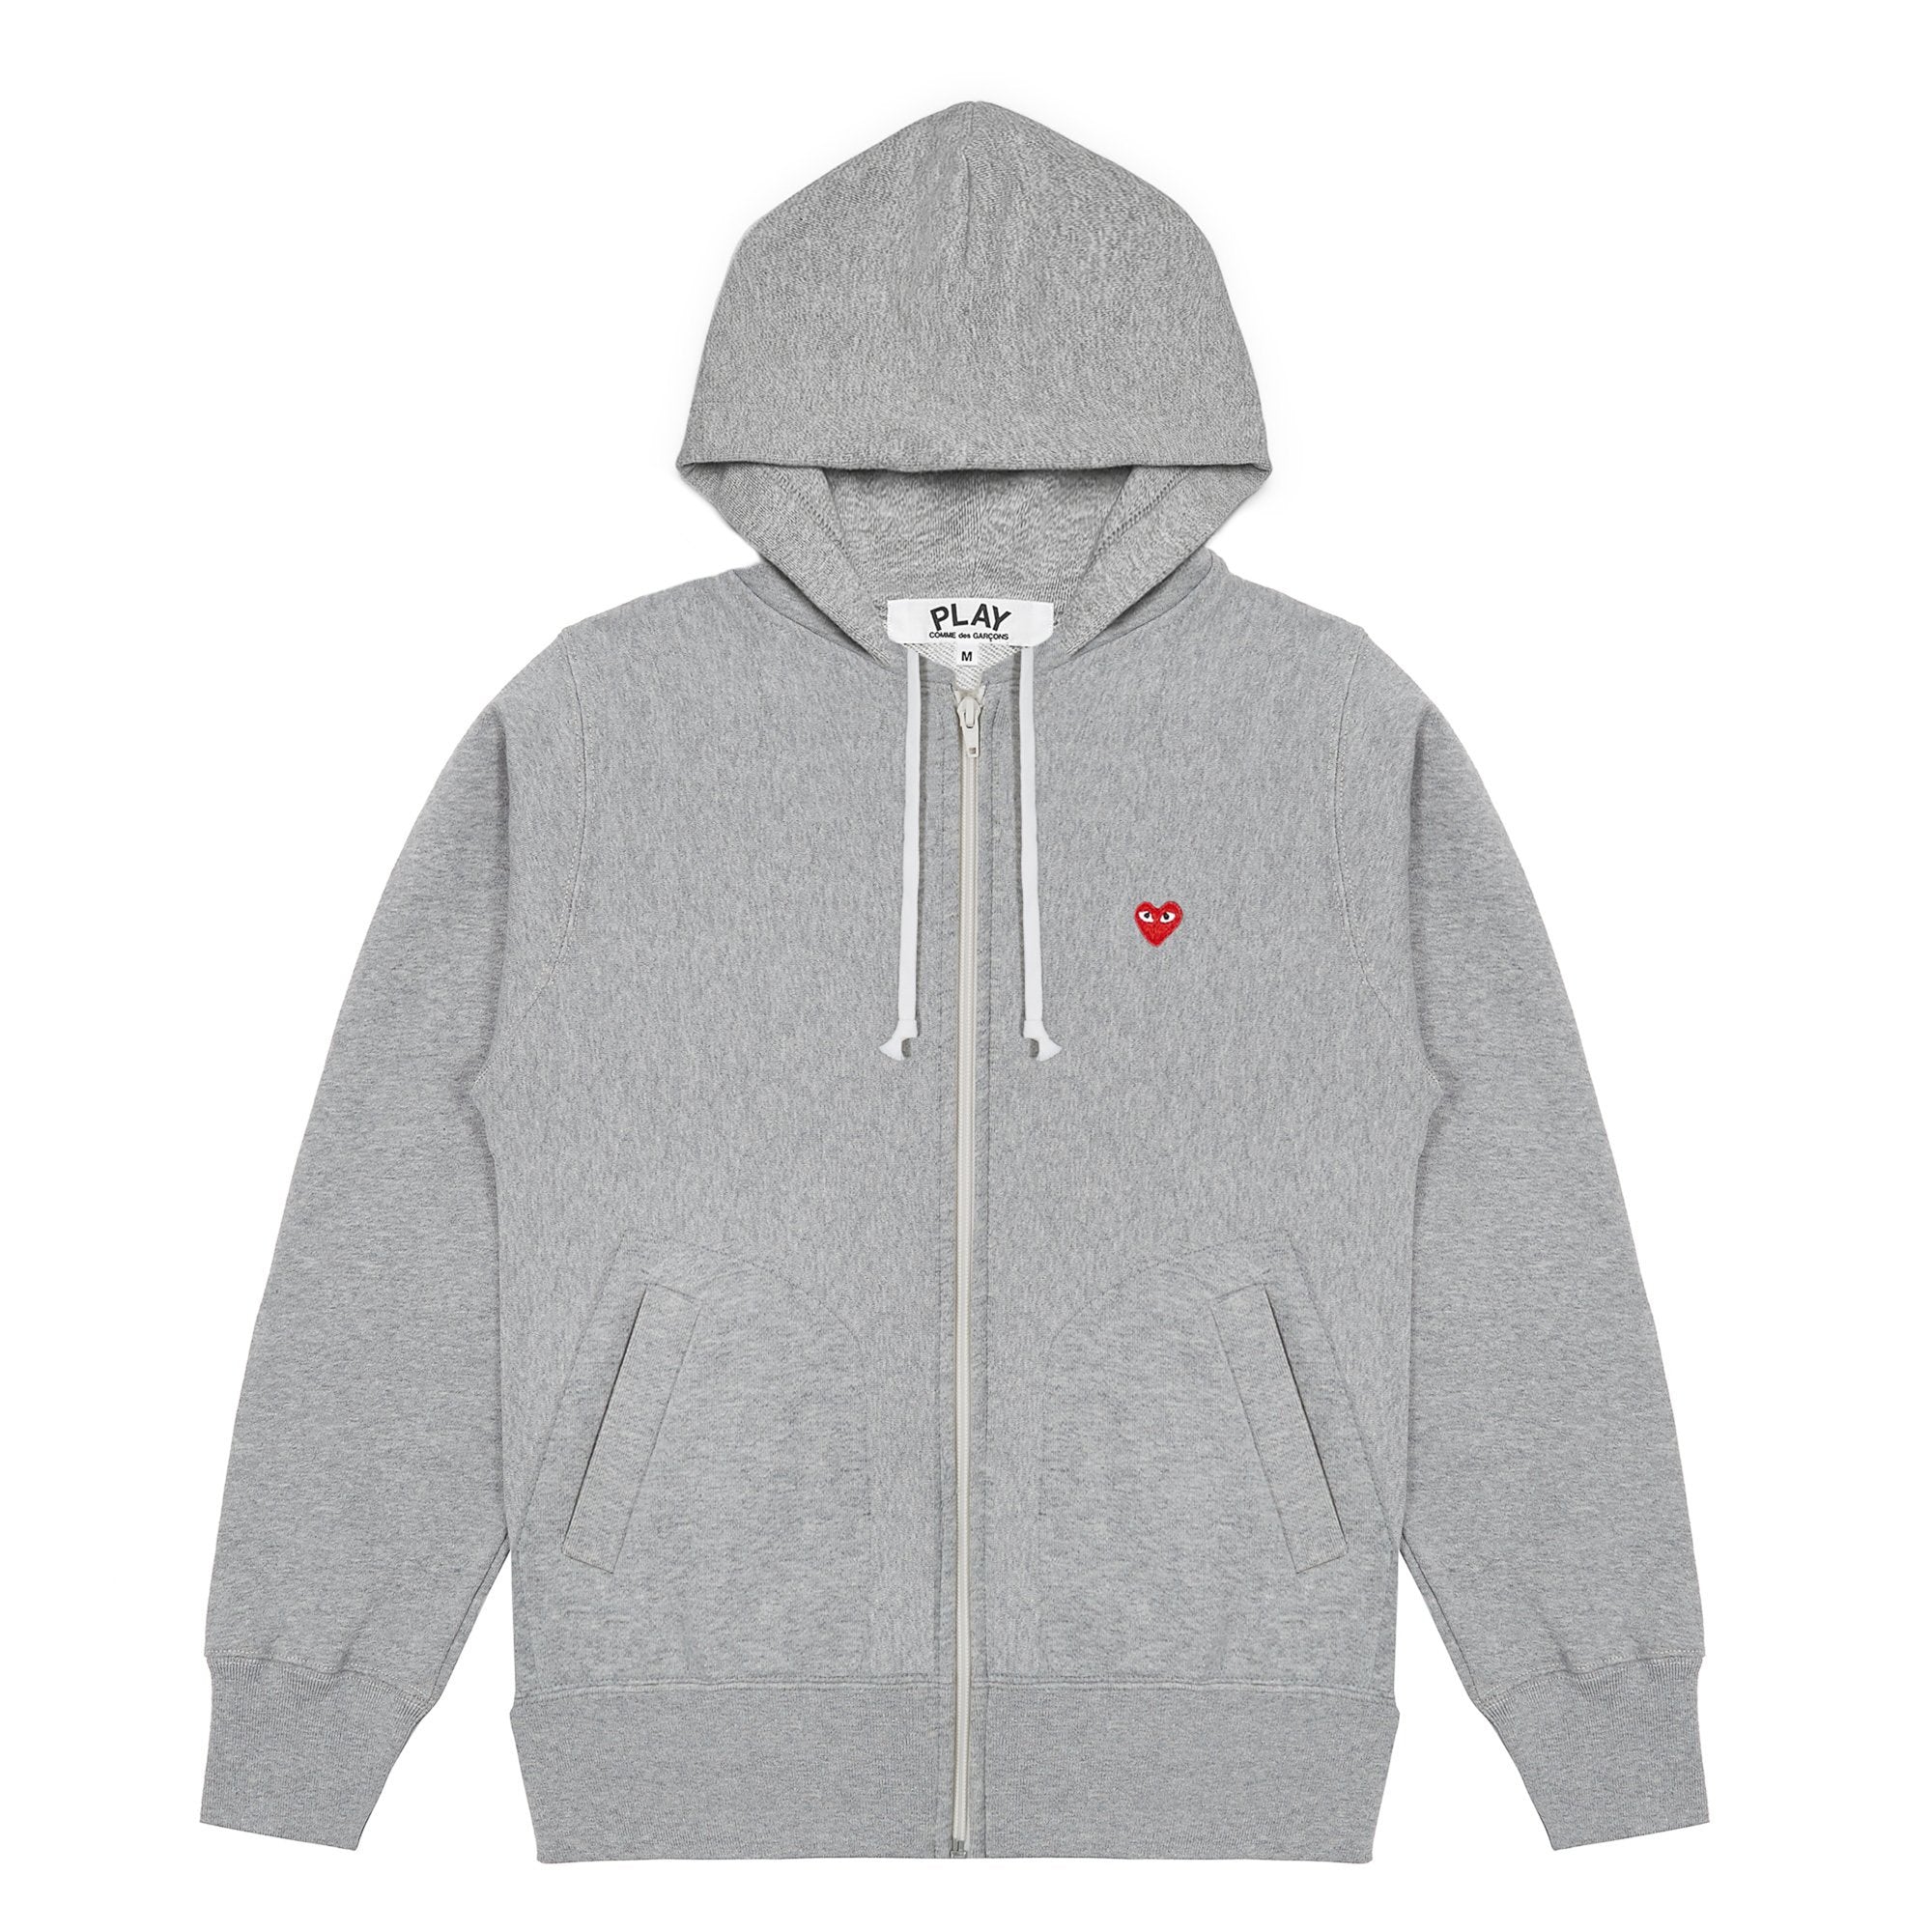 PLAY CDG HOODED SWEAT SHIRT WITH SMALL RED HEART - (TOP GREY) DSMG